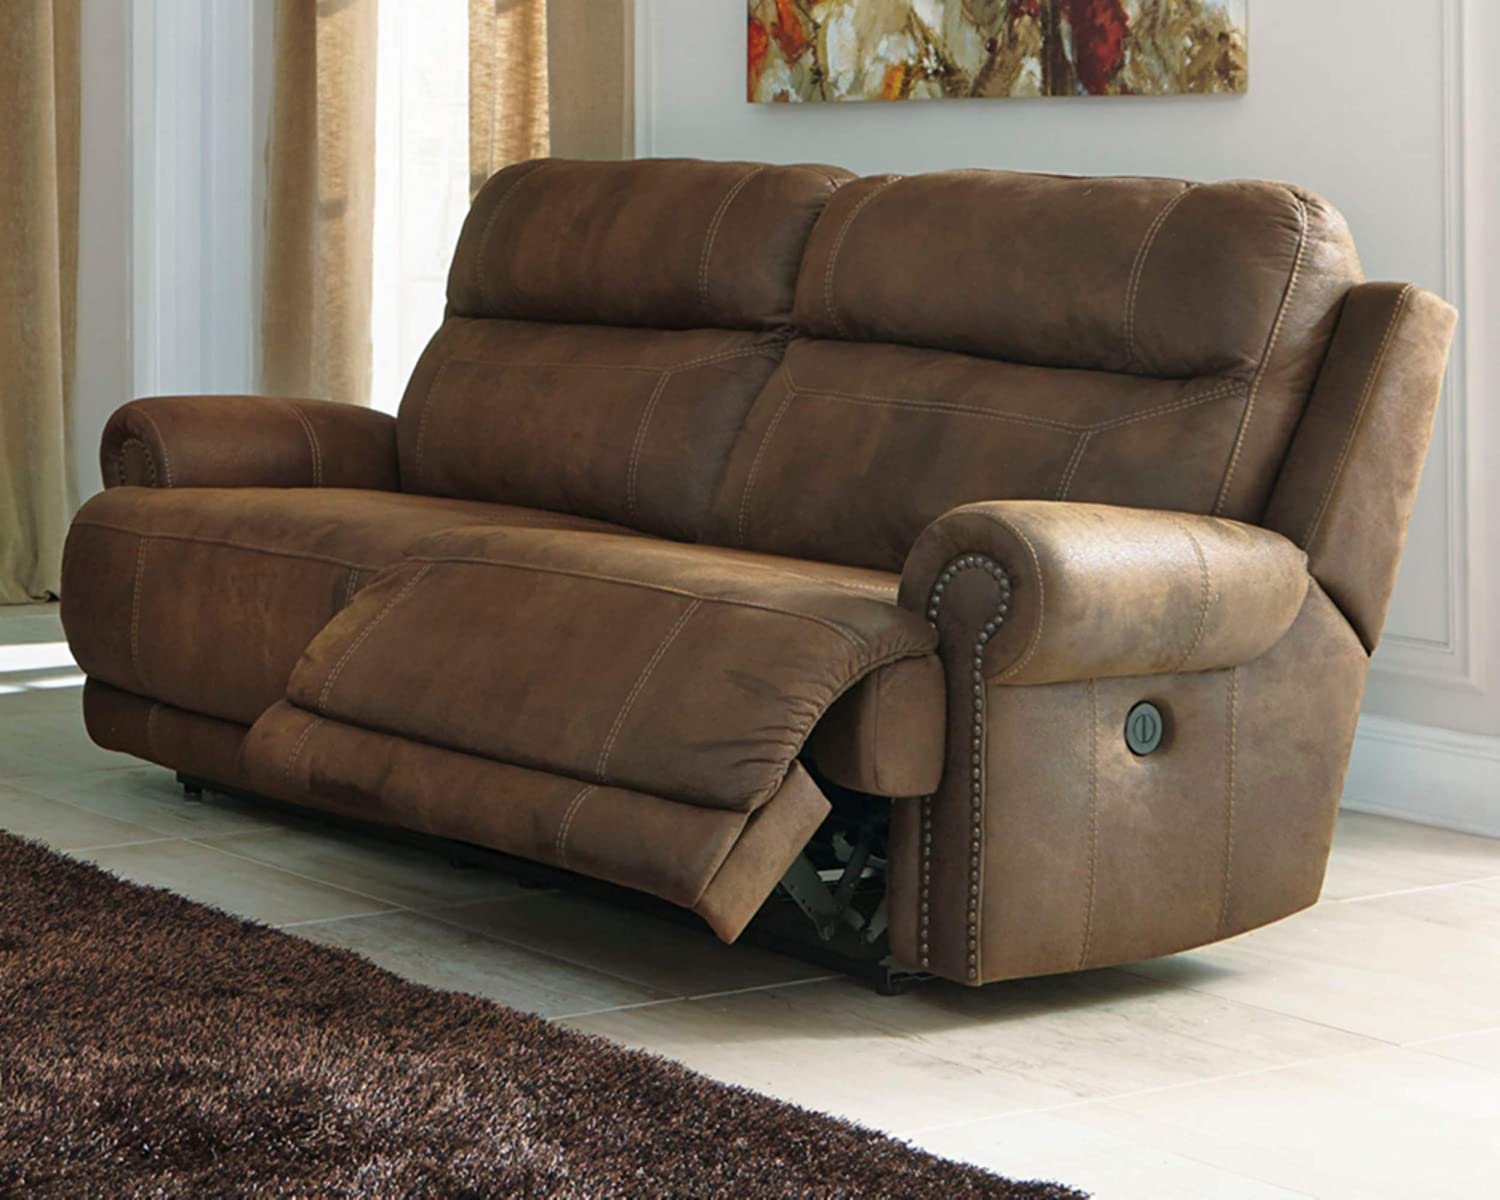 Signature Design by Ashley Austere 2-Seat Reclining Power Sofa